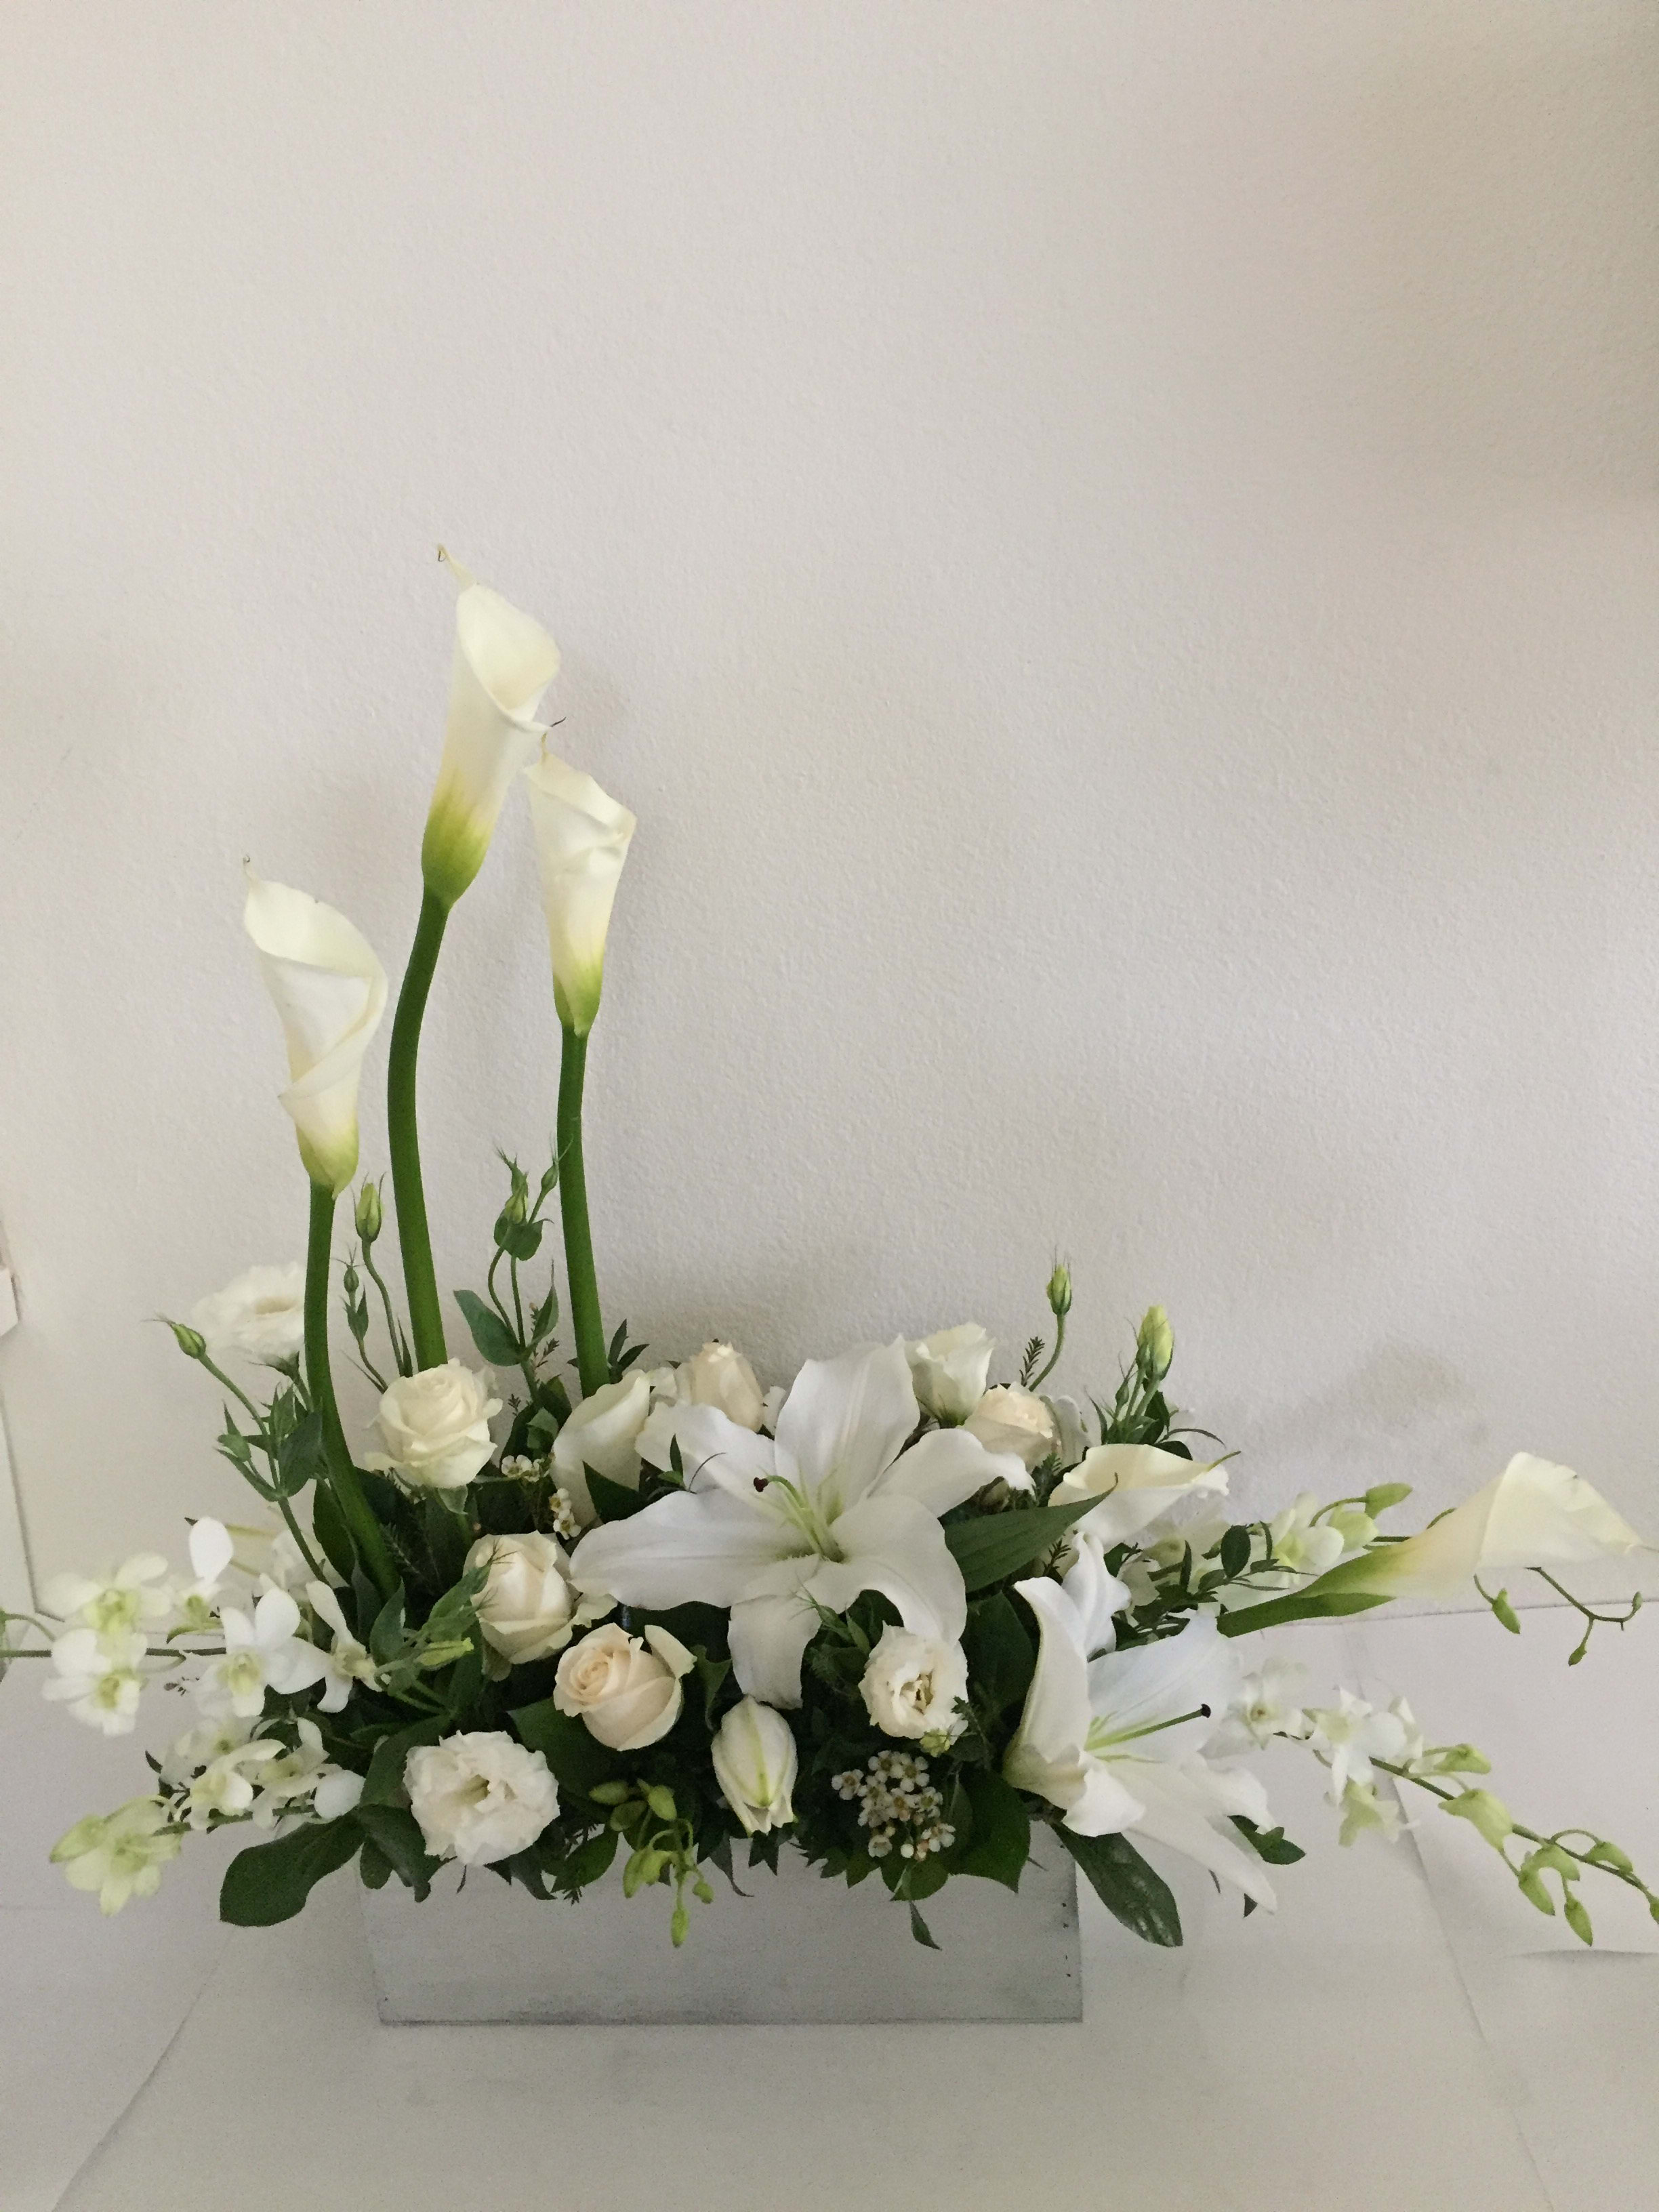 All white - This arrangement is modern and great for your special occasion. Availability: 24 hours notice